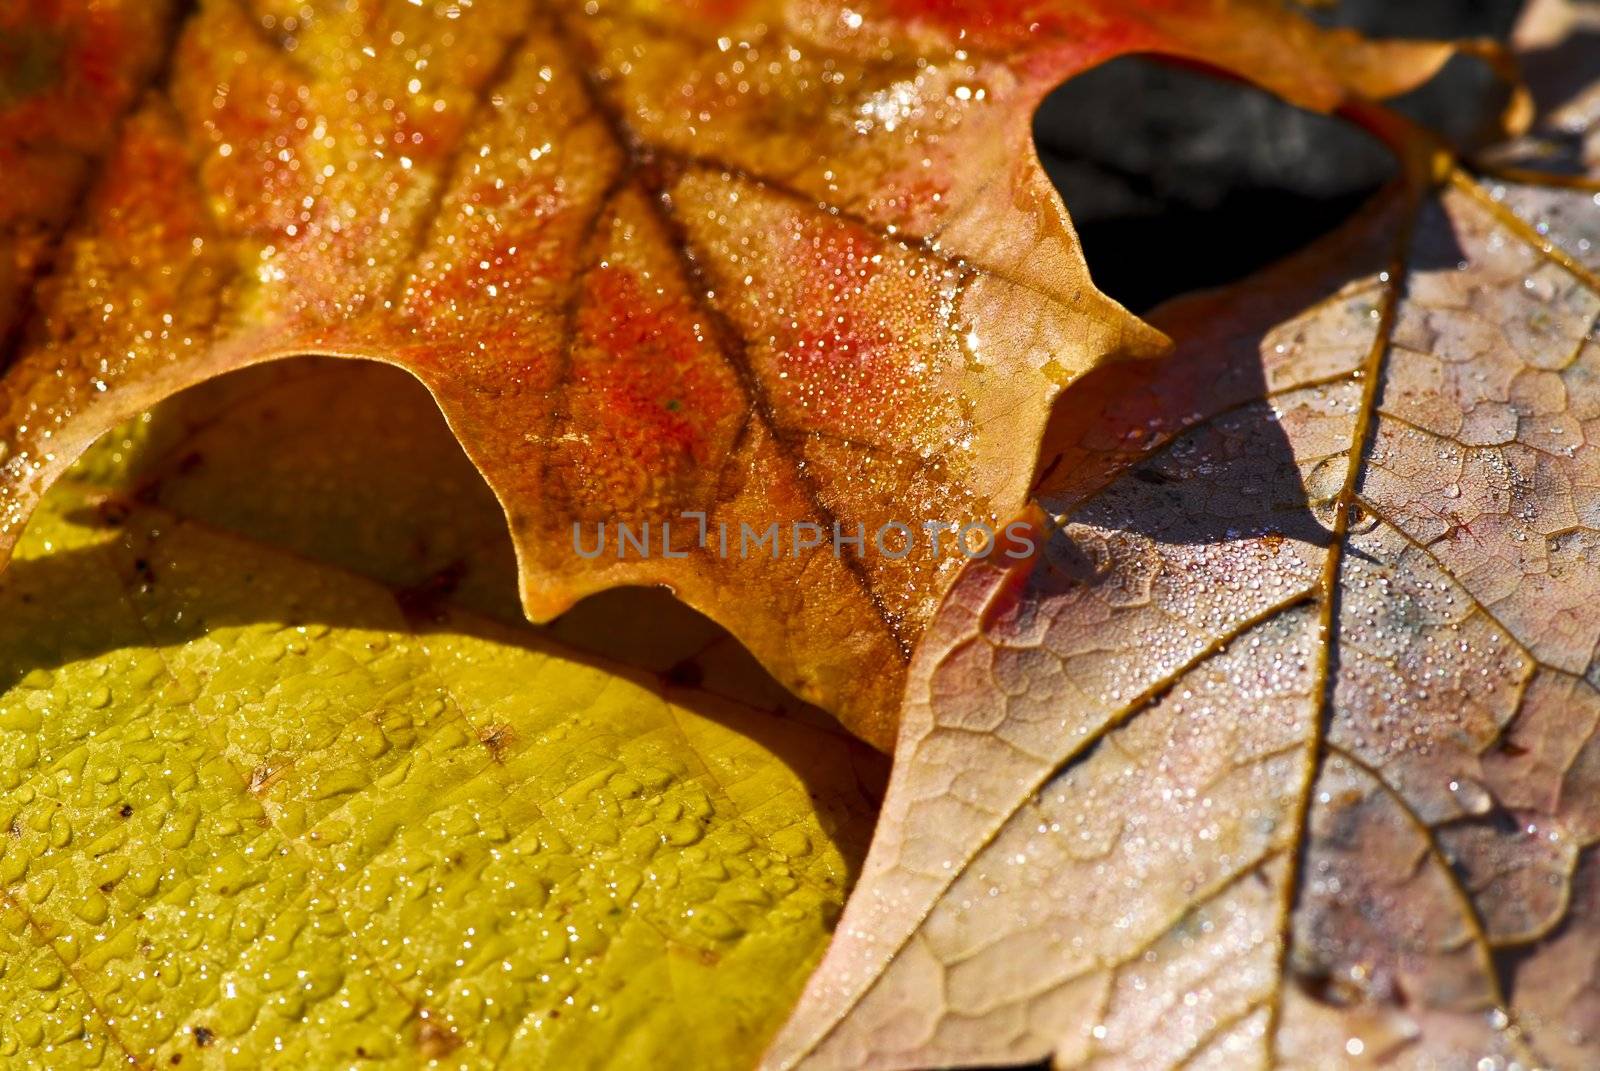 Macro of dewy autumn leaves of bright fall colors